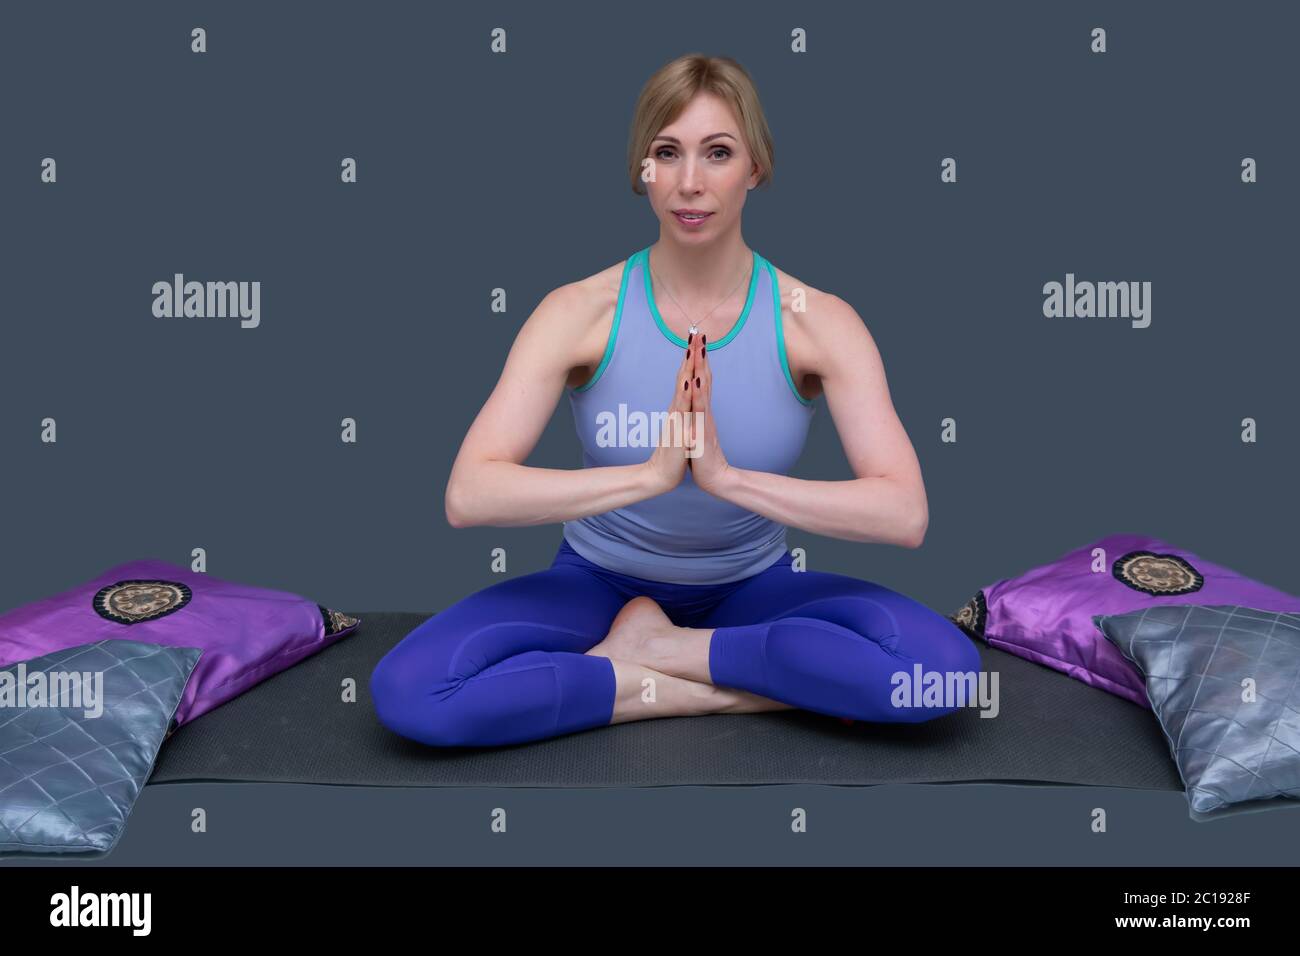 Health and personal care concept. White beautiful woman is doing yoga exercises. Stock Photo